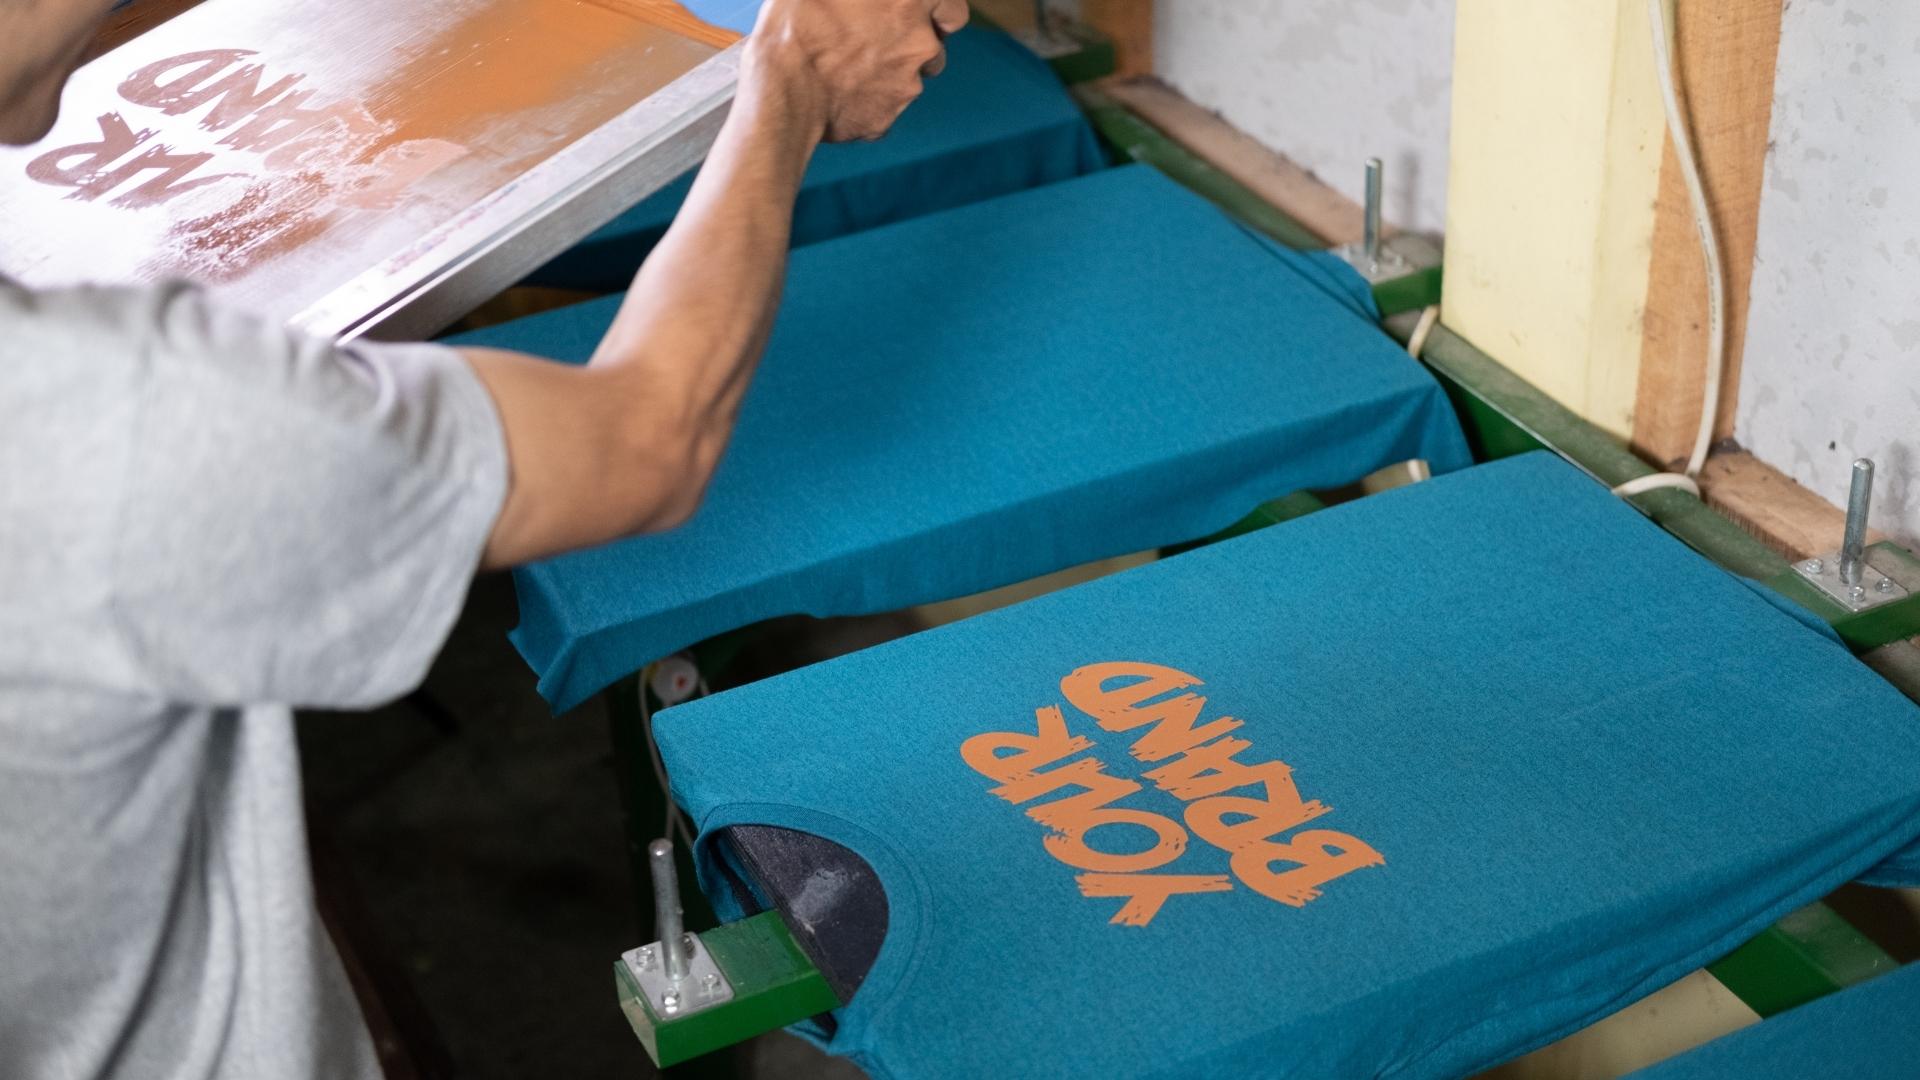 screen printing tshirts, what is screen printing, promotional products, what is screen printing, blog br printers, screen printing history, what is screenprinting, process of screen printing, the history of screen printing, what is screen printing used for